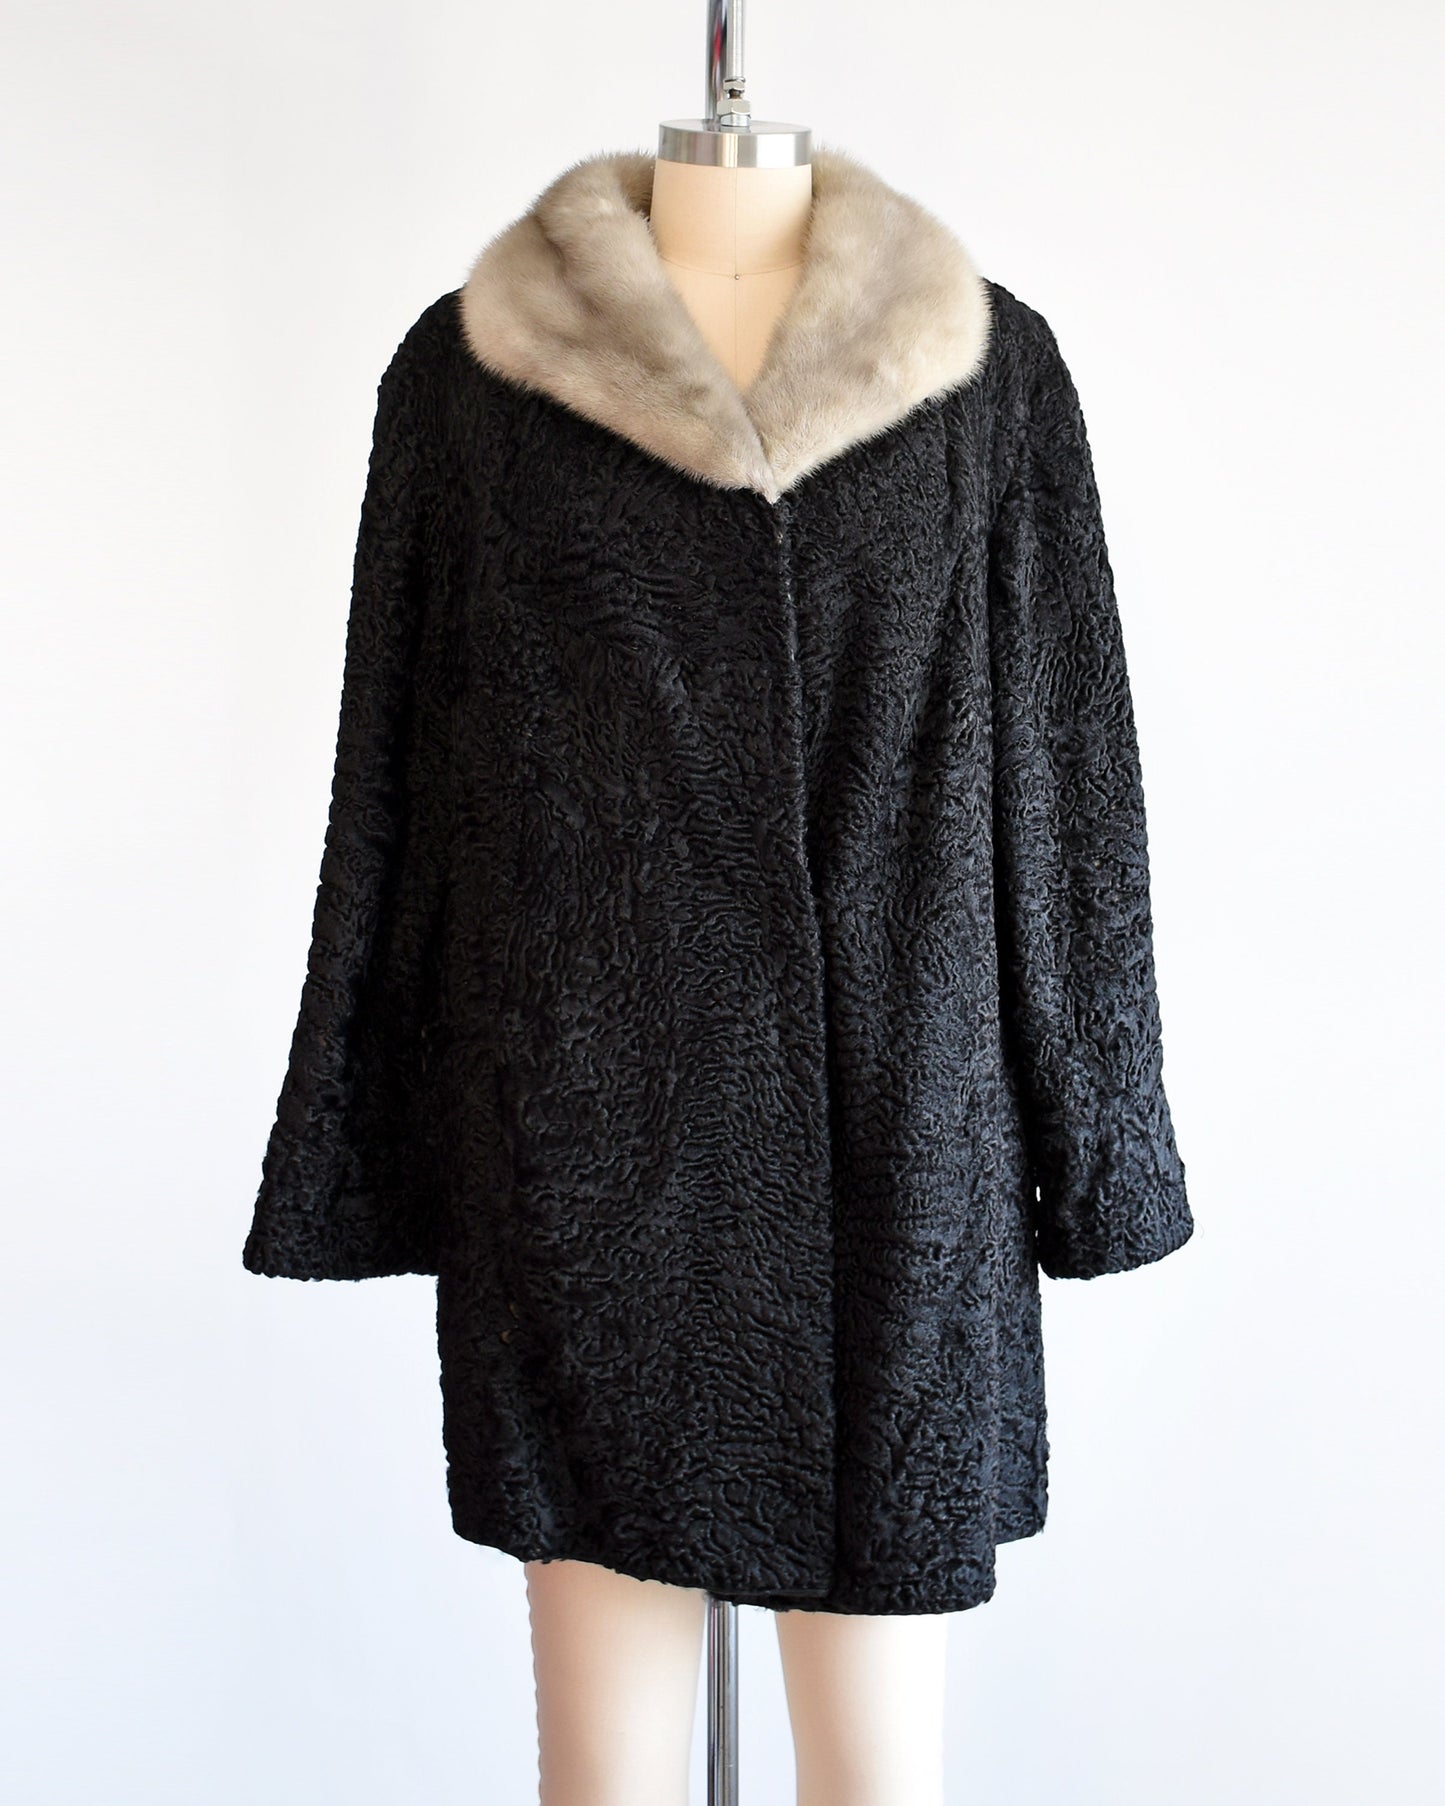 A vintage late 50s early 60s black curly Persian lamb coat that has a silver gray mink fur collar. Two hidden hook and eye closures down the front. Coat is on a dress form.